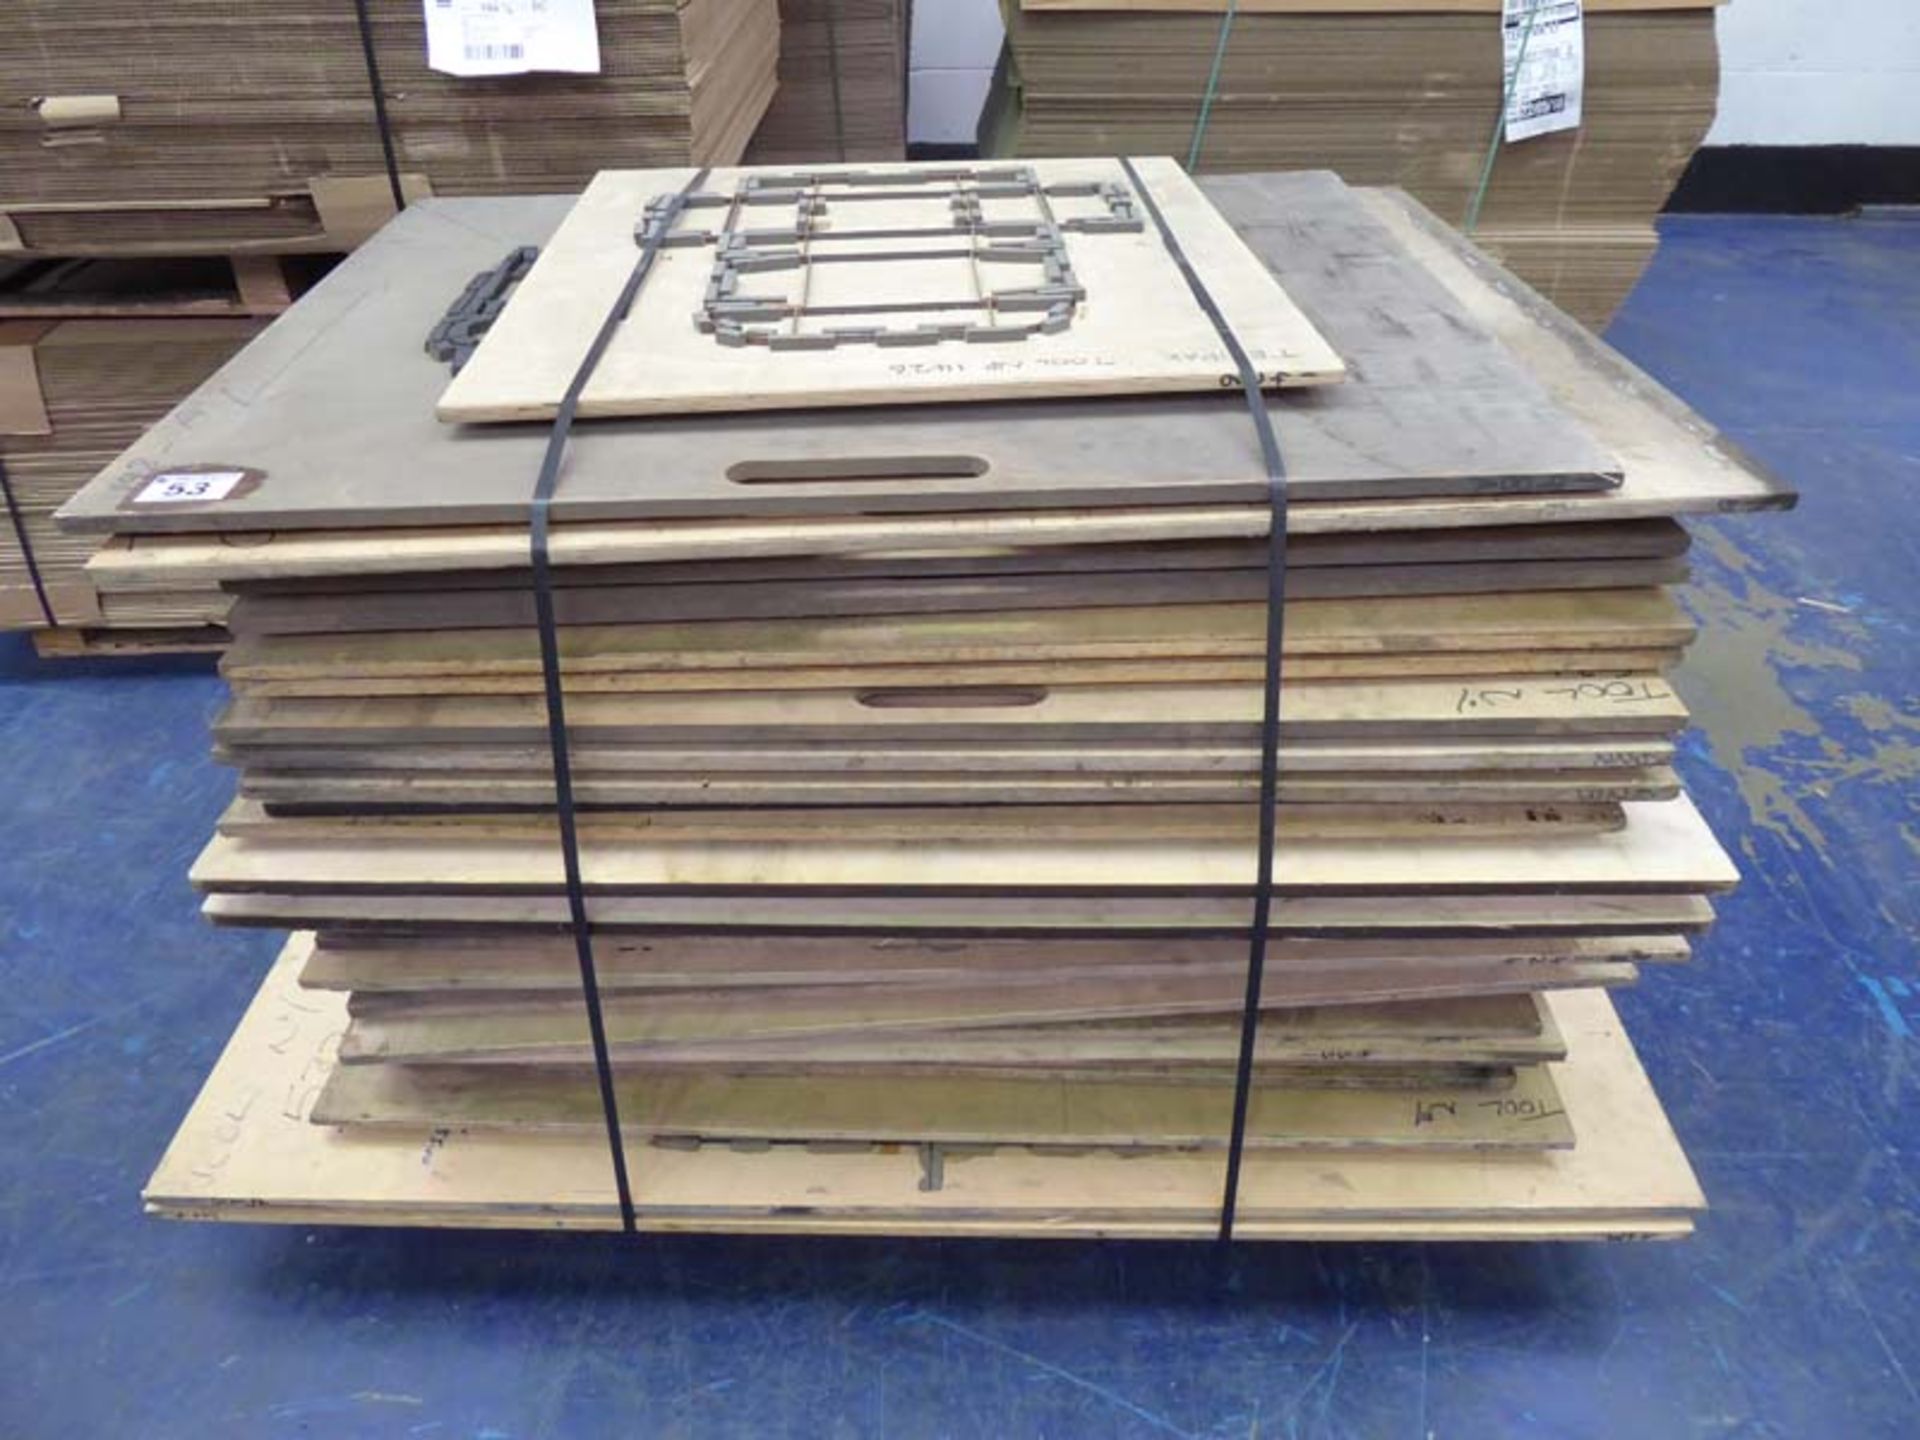 3 pallets of plywood based cardboard cutting platens